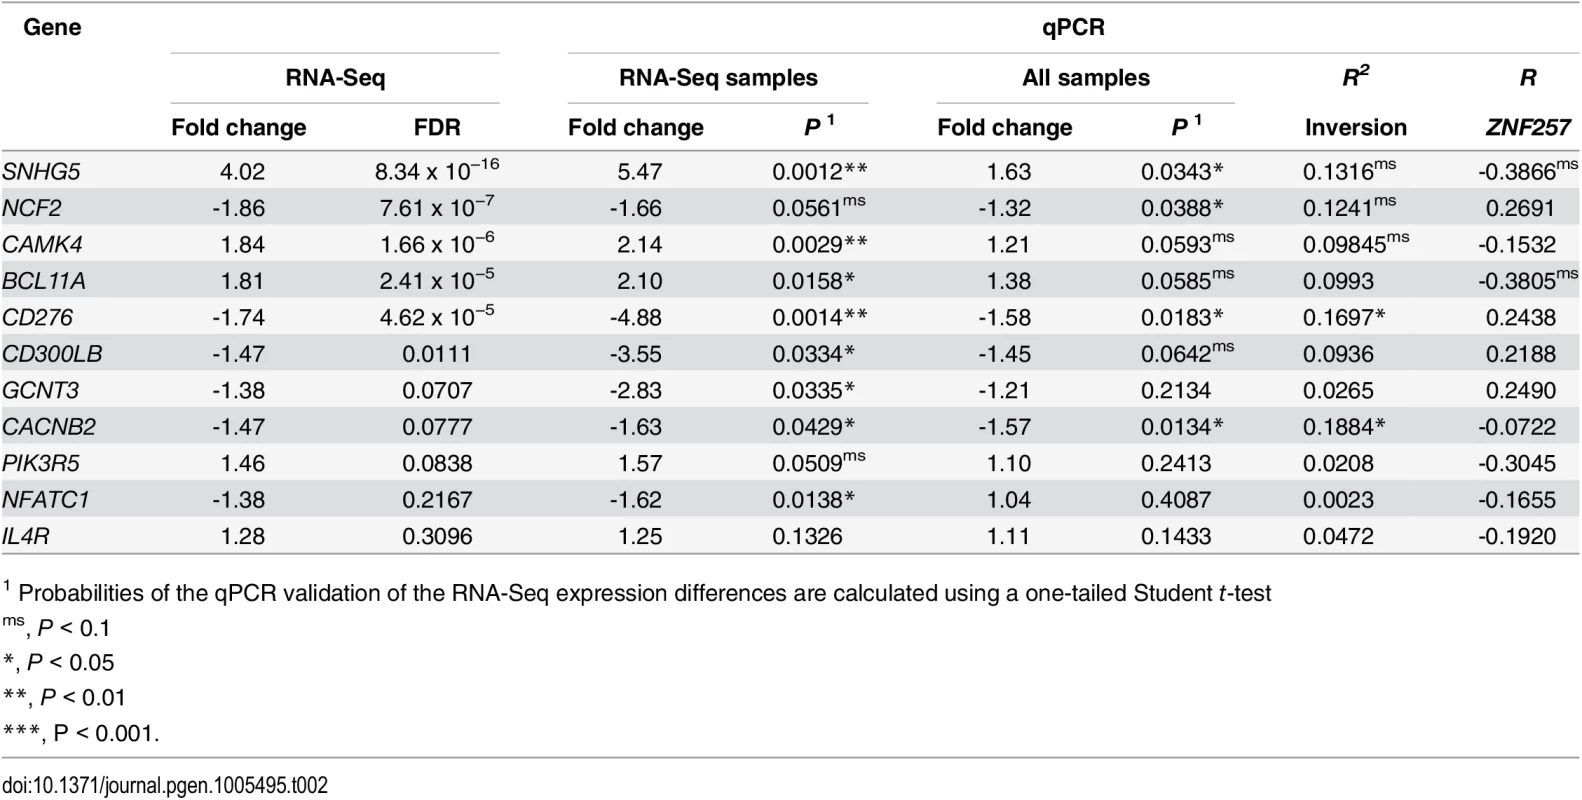 Analysis of RNA-Seq gene-expression changes between <i>Std/Std</i> and <i>Std/Inv</i> individuals by qPCR.